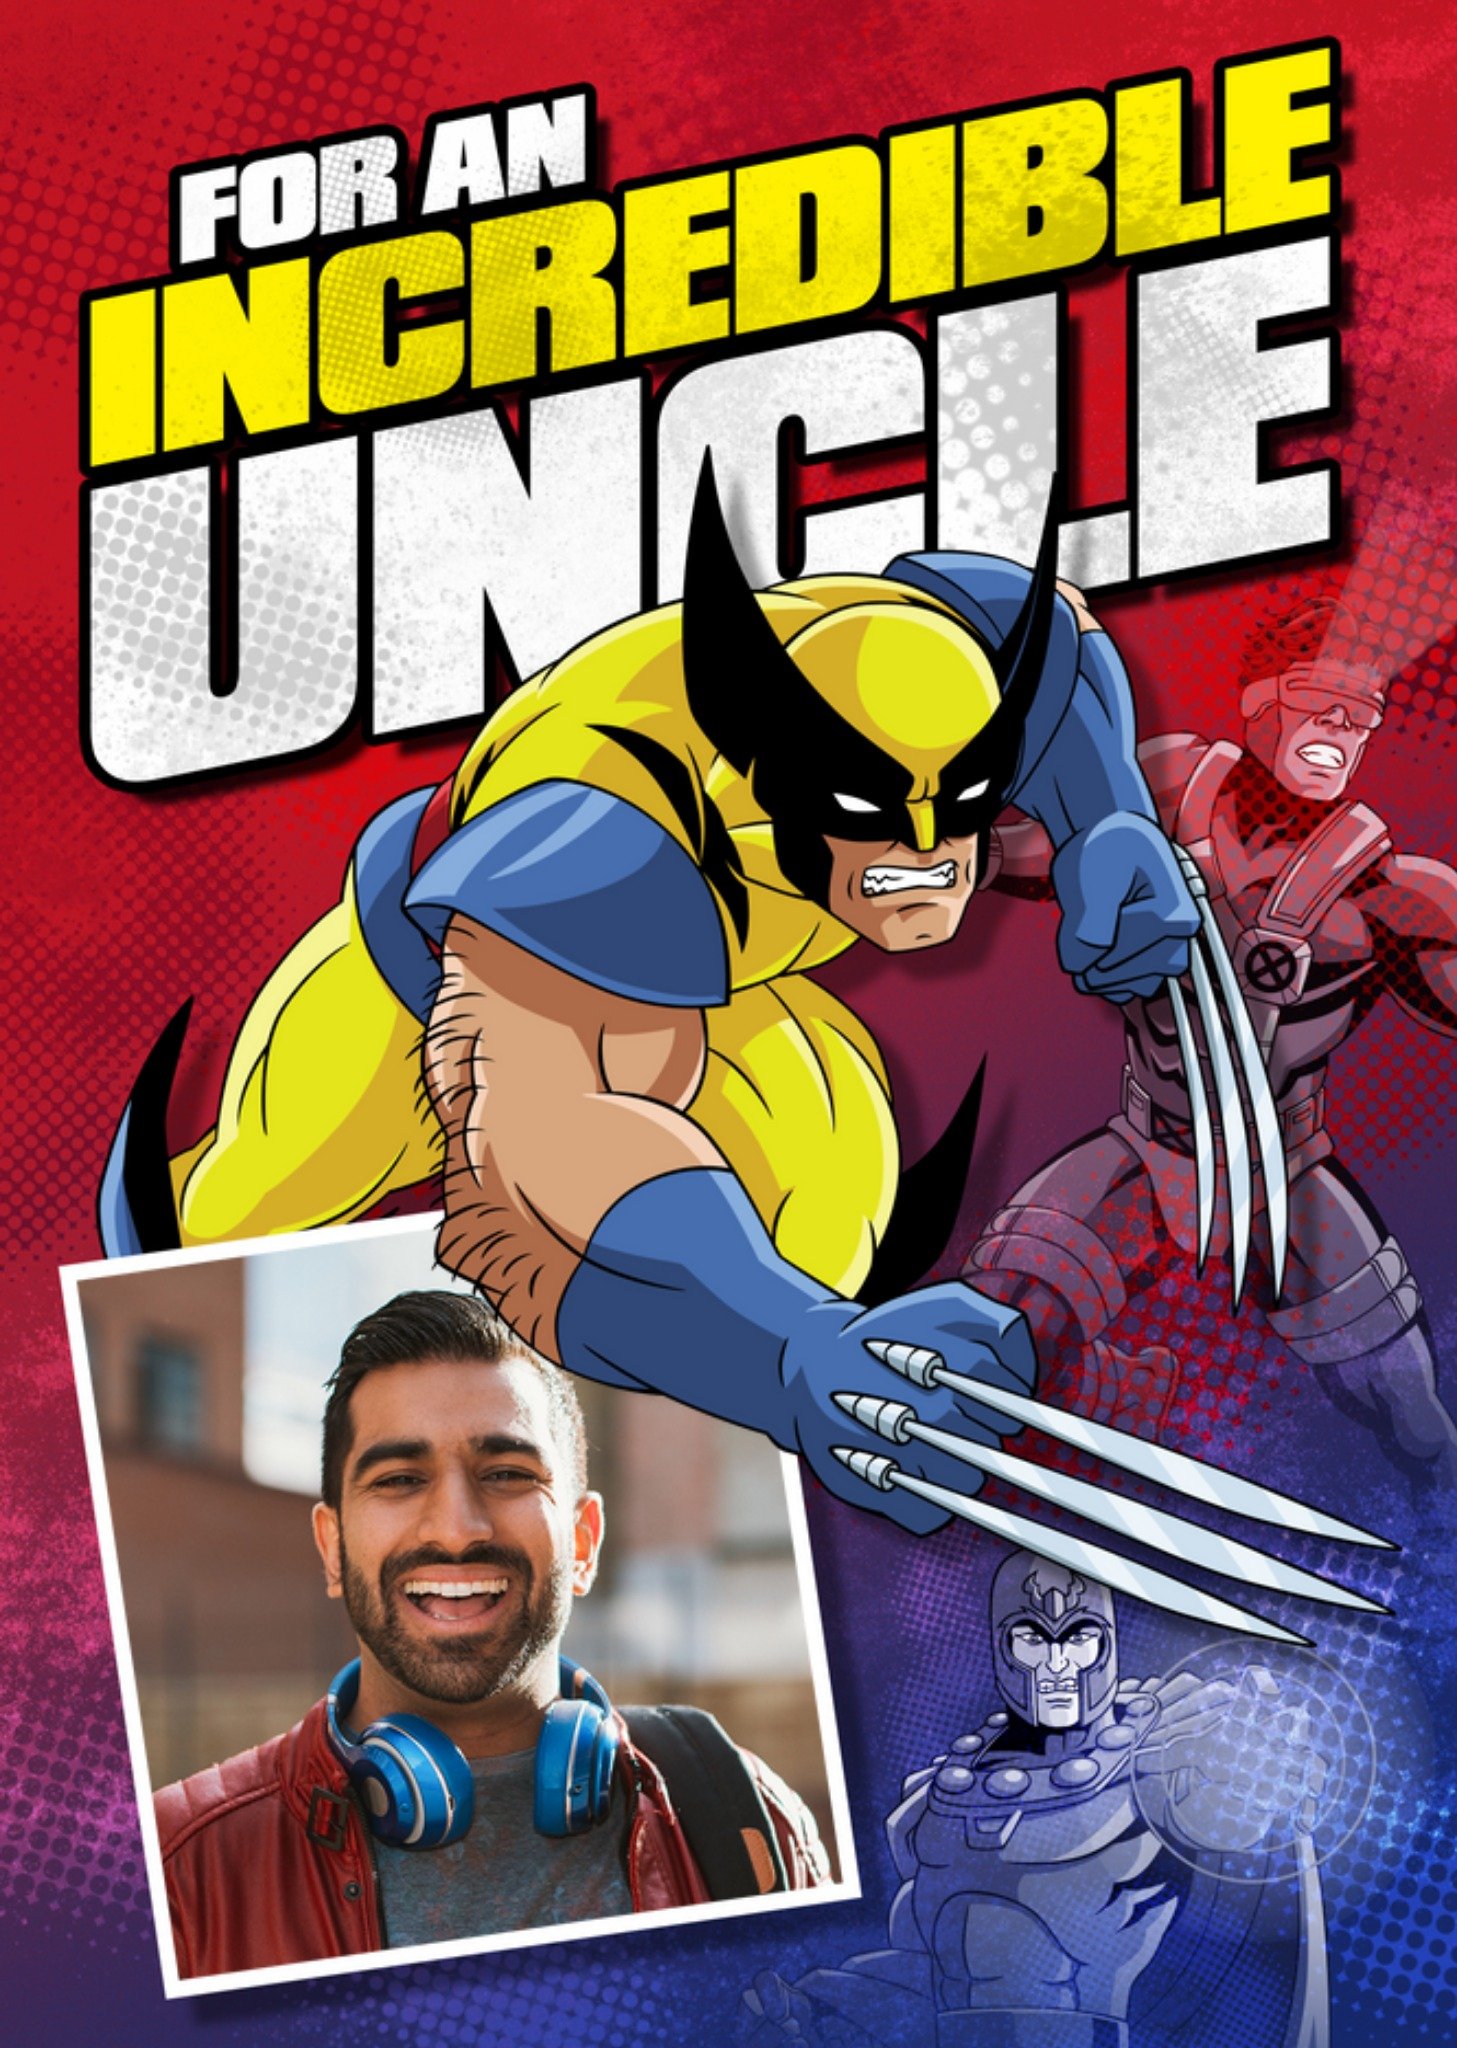 Marvel Xmen For An Incredible Uncle Card Ecard